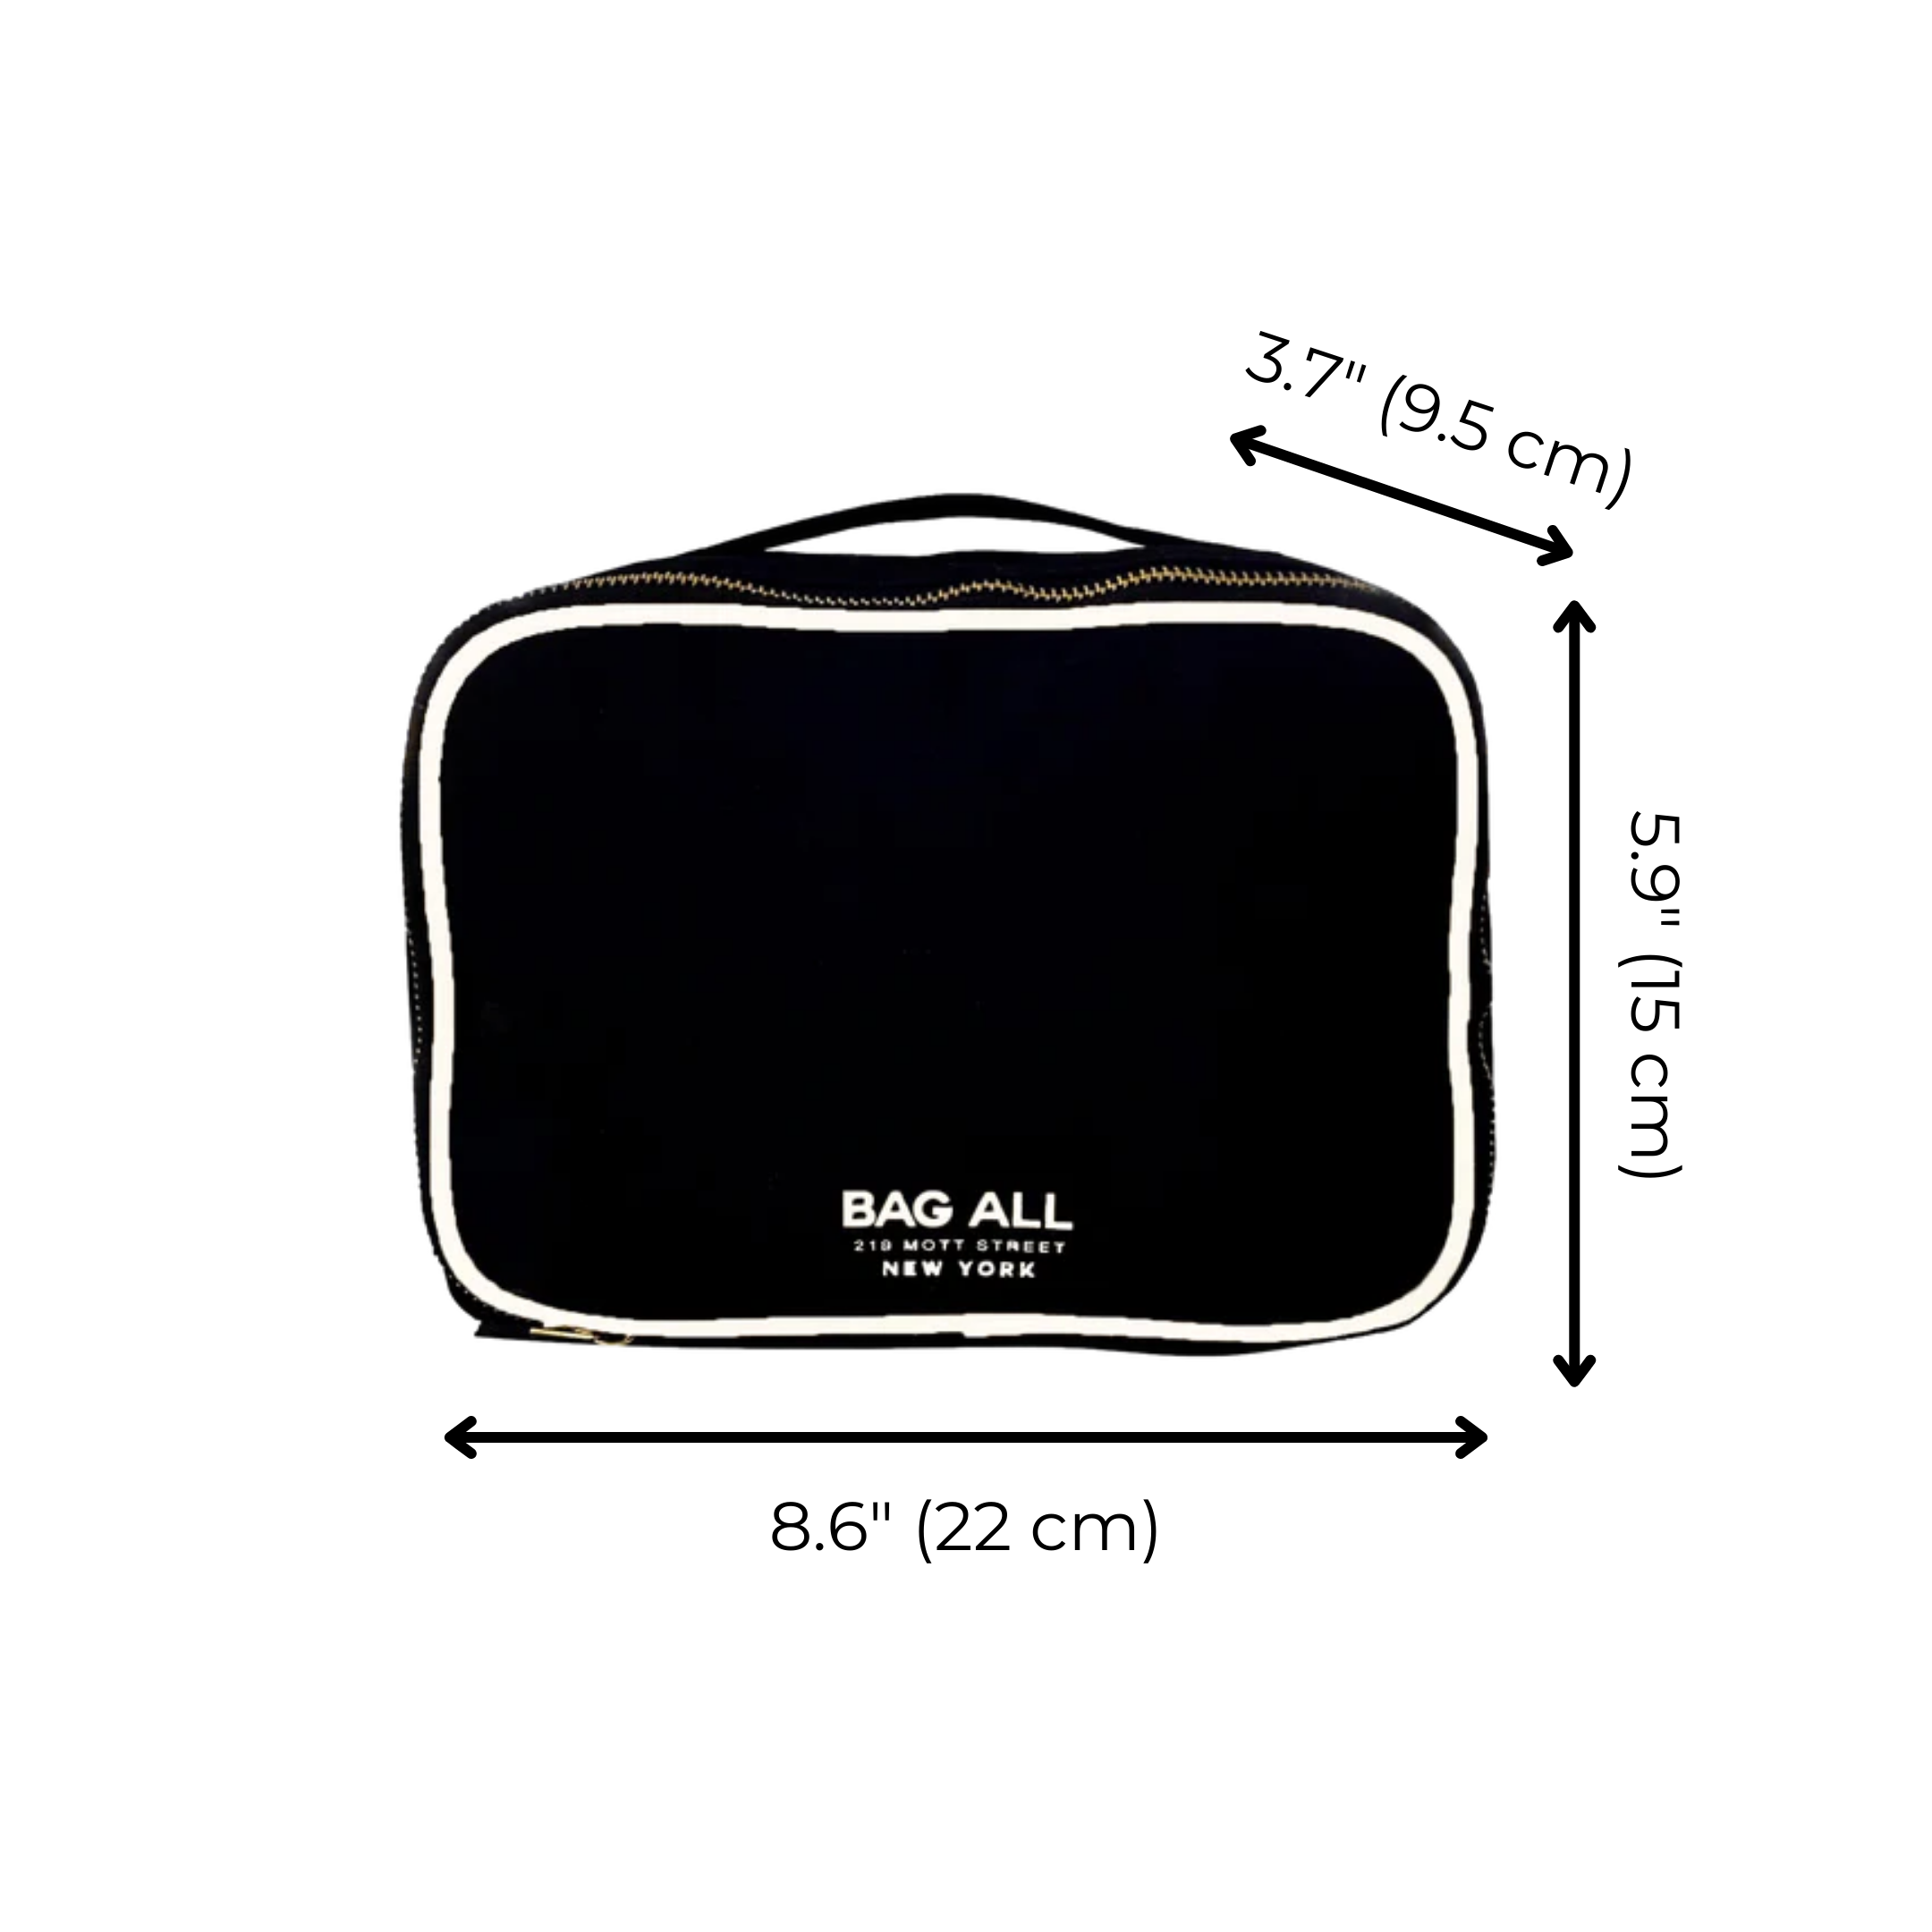 Double Sided Multi Use Case, Black | Bag-all